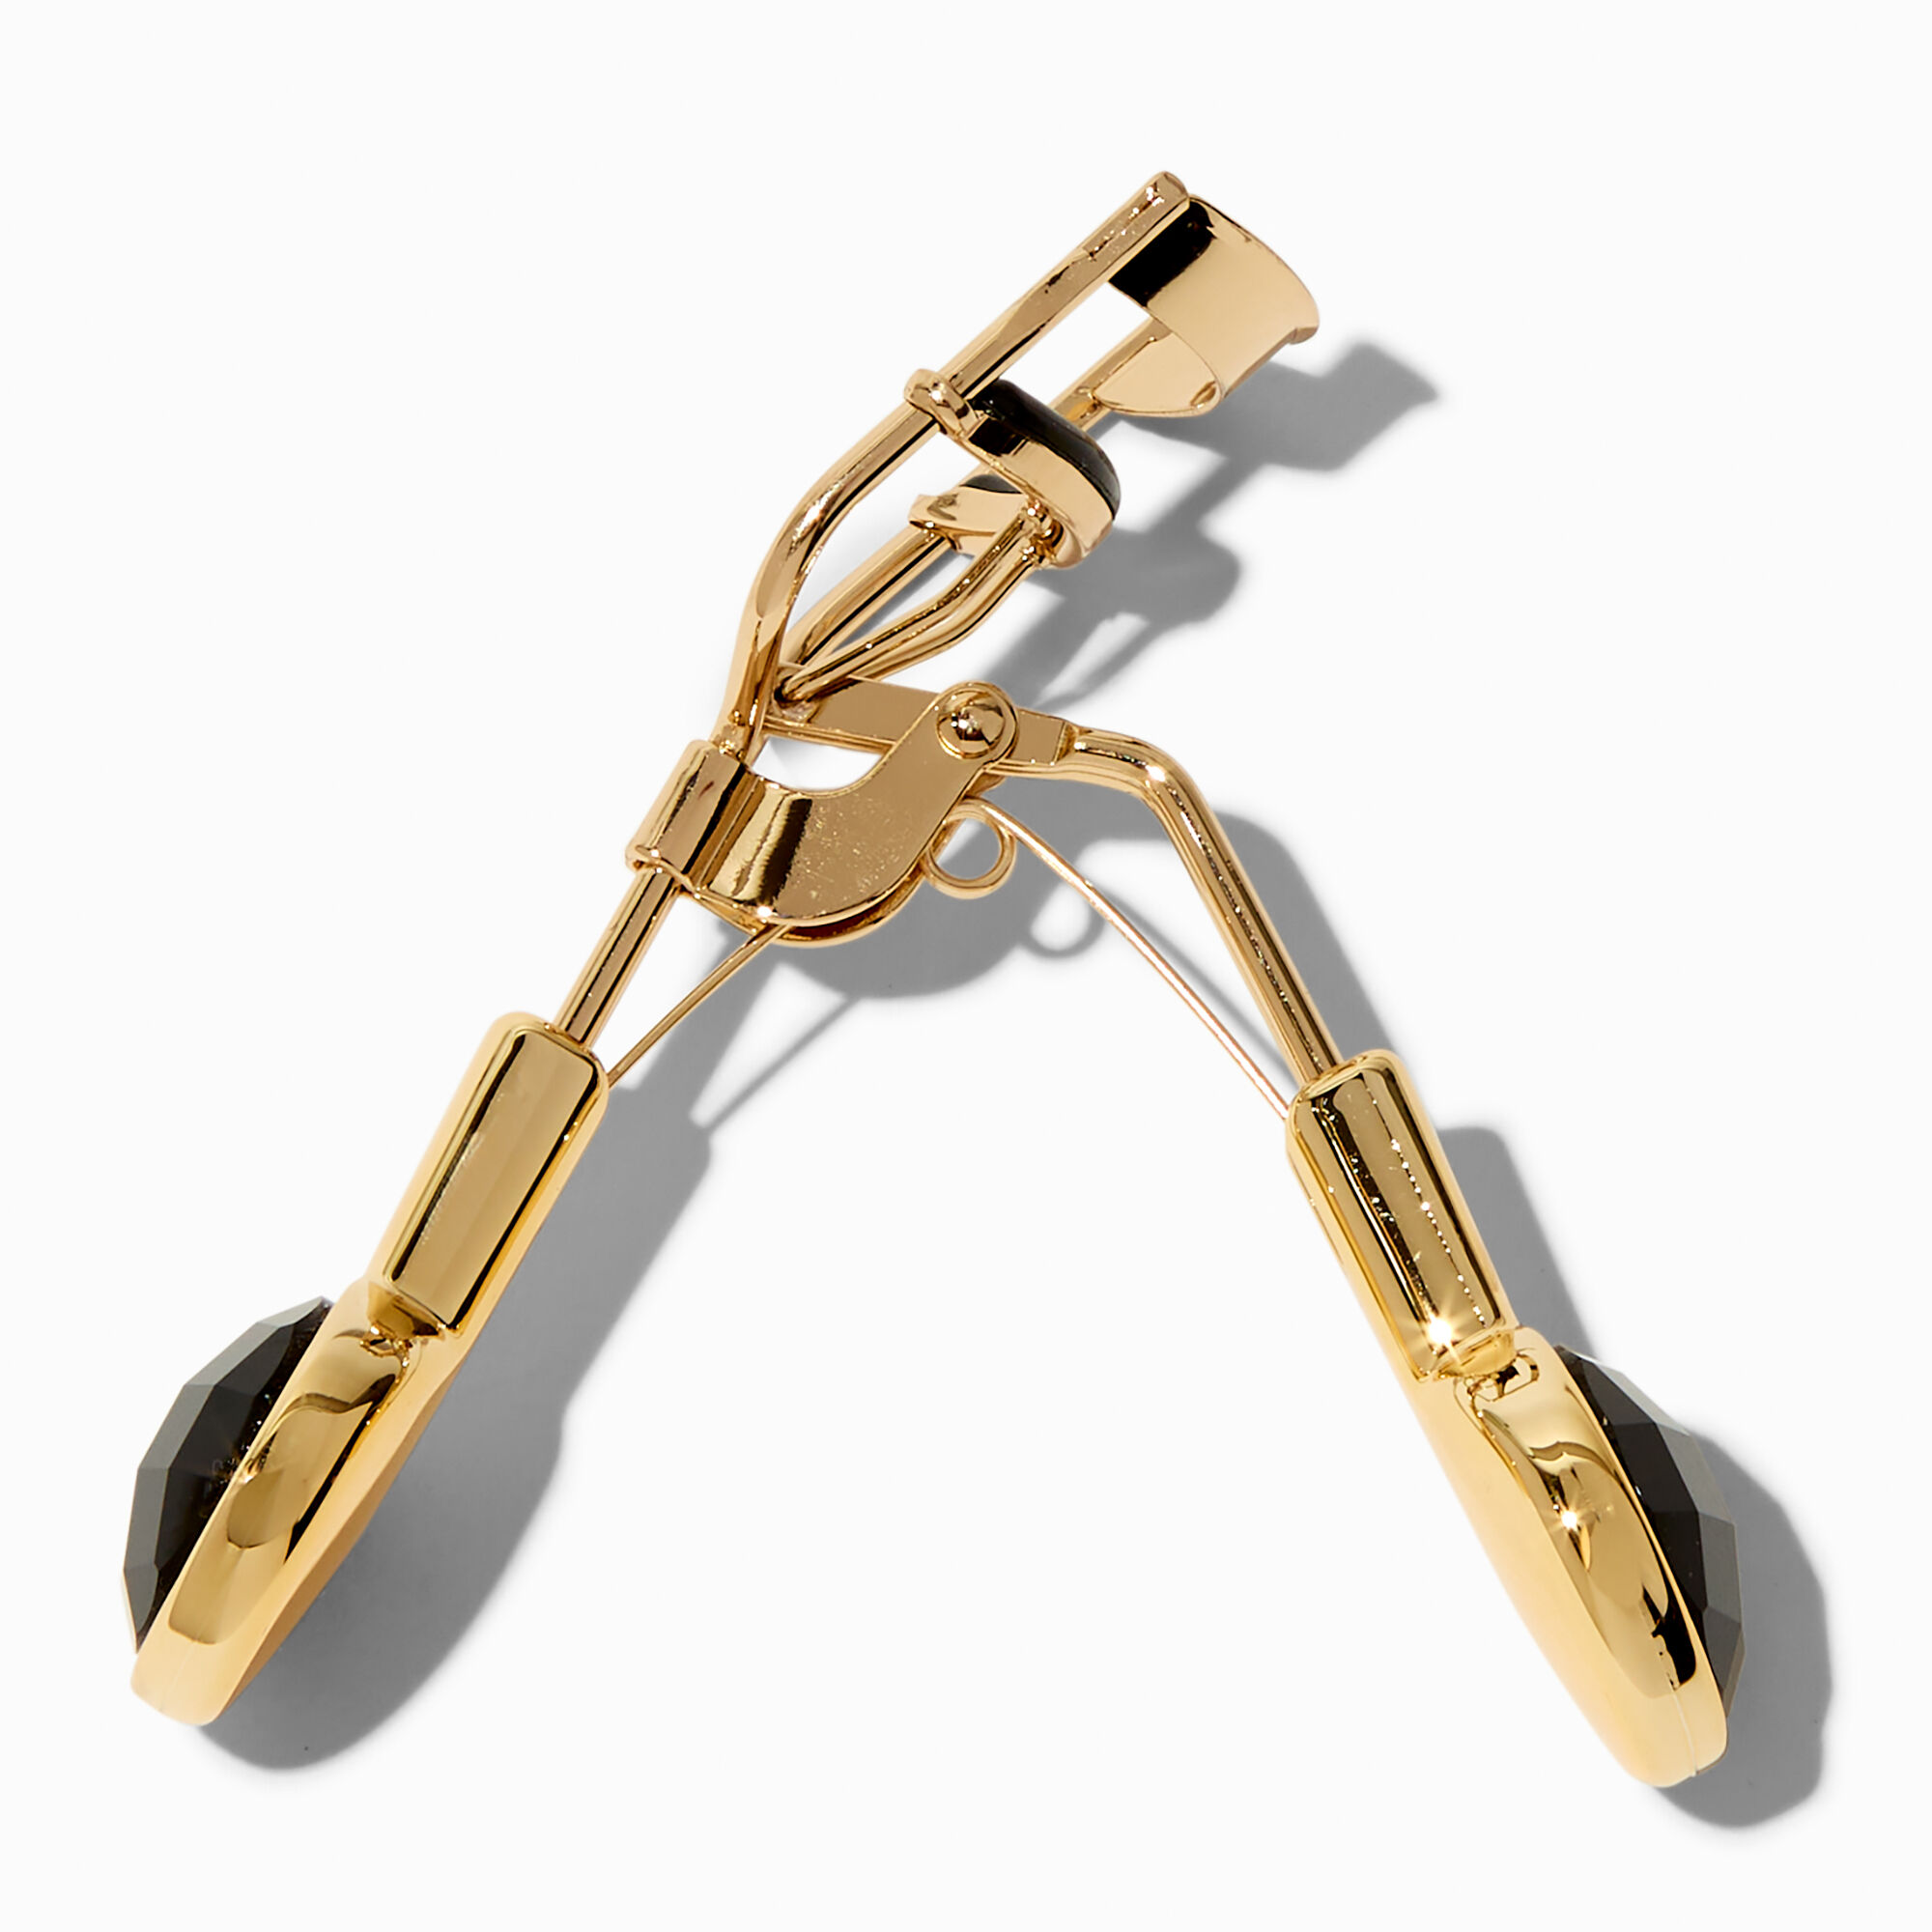 View Claires Eyelash Curler Gold information